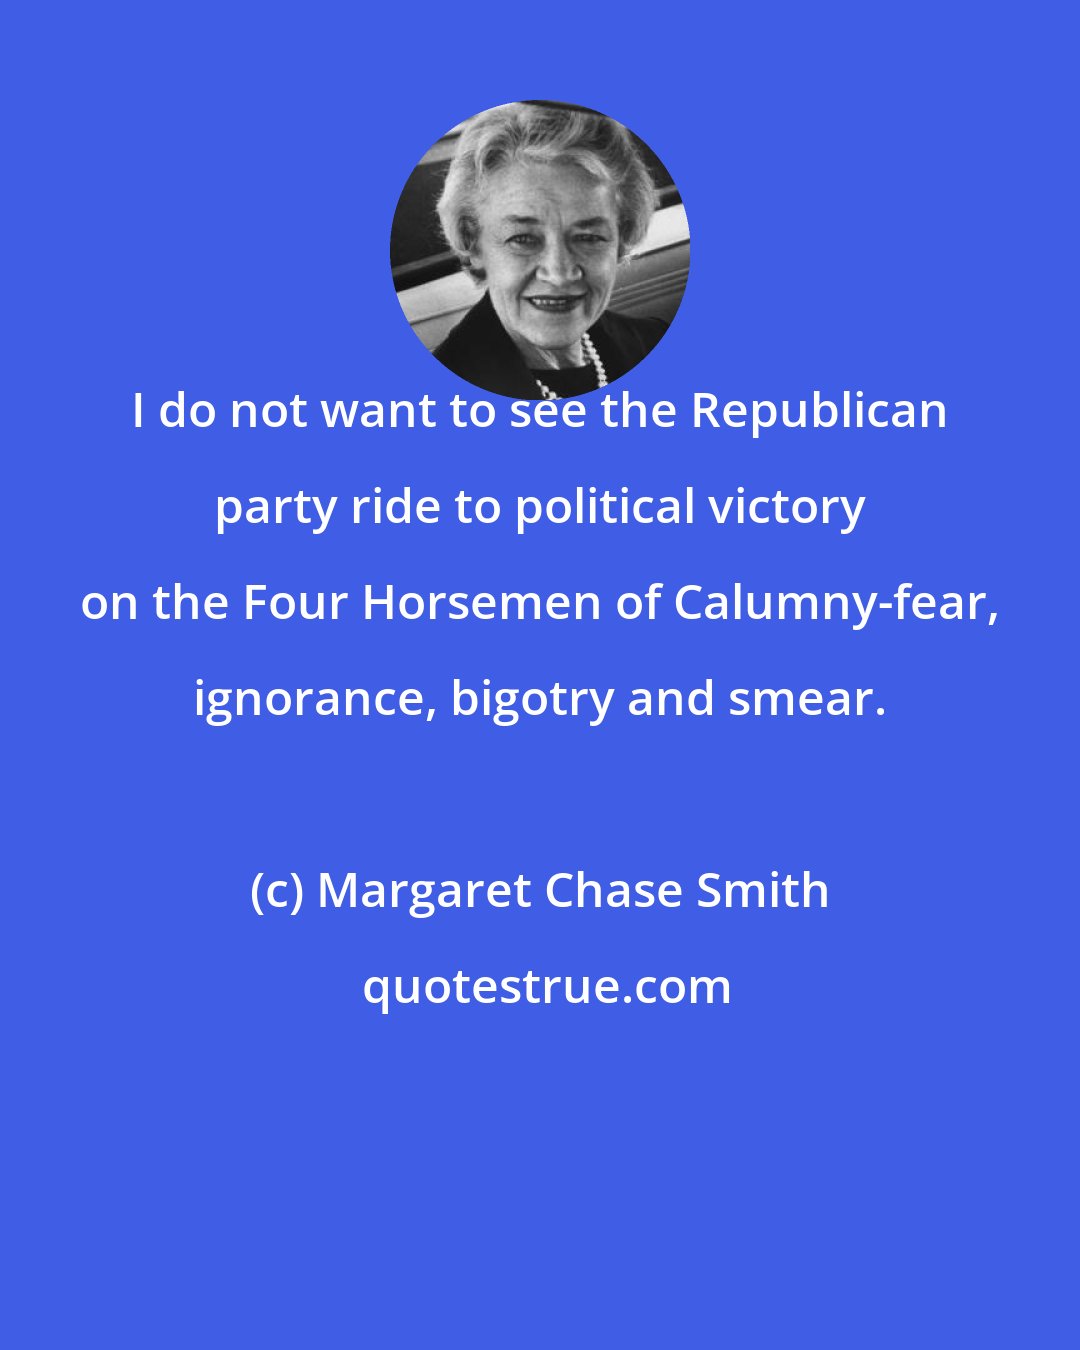 Margaret Chase Smith: I do not want to see the Republican party ride to political victory on the Four Horsemen of Calumny-fear, ignorance, bigotry and smear.